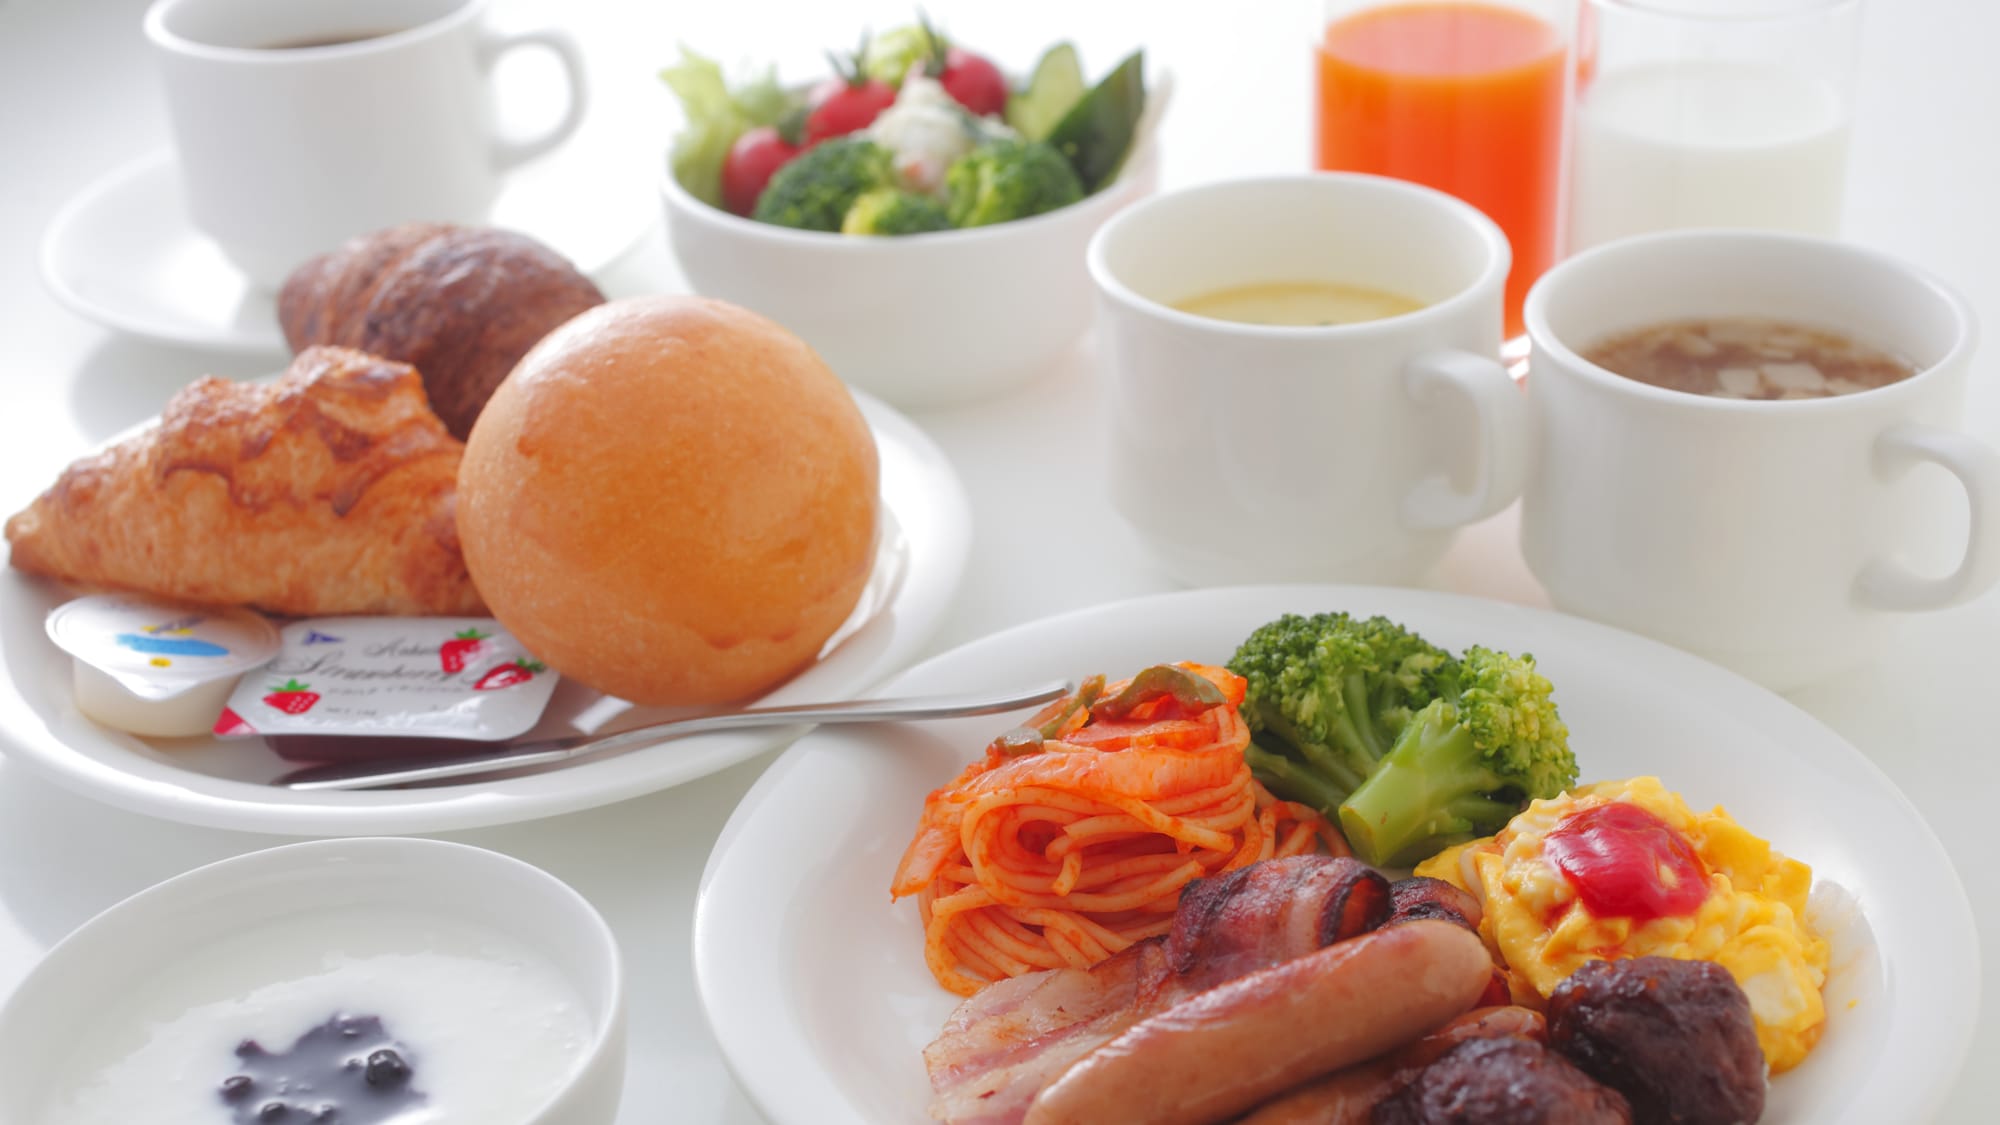 There are about 30 kinds of breakfast buffet. You can enjoy Japanese and Western dishes as you like.